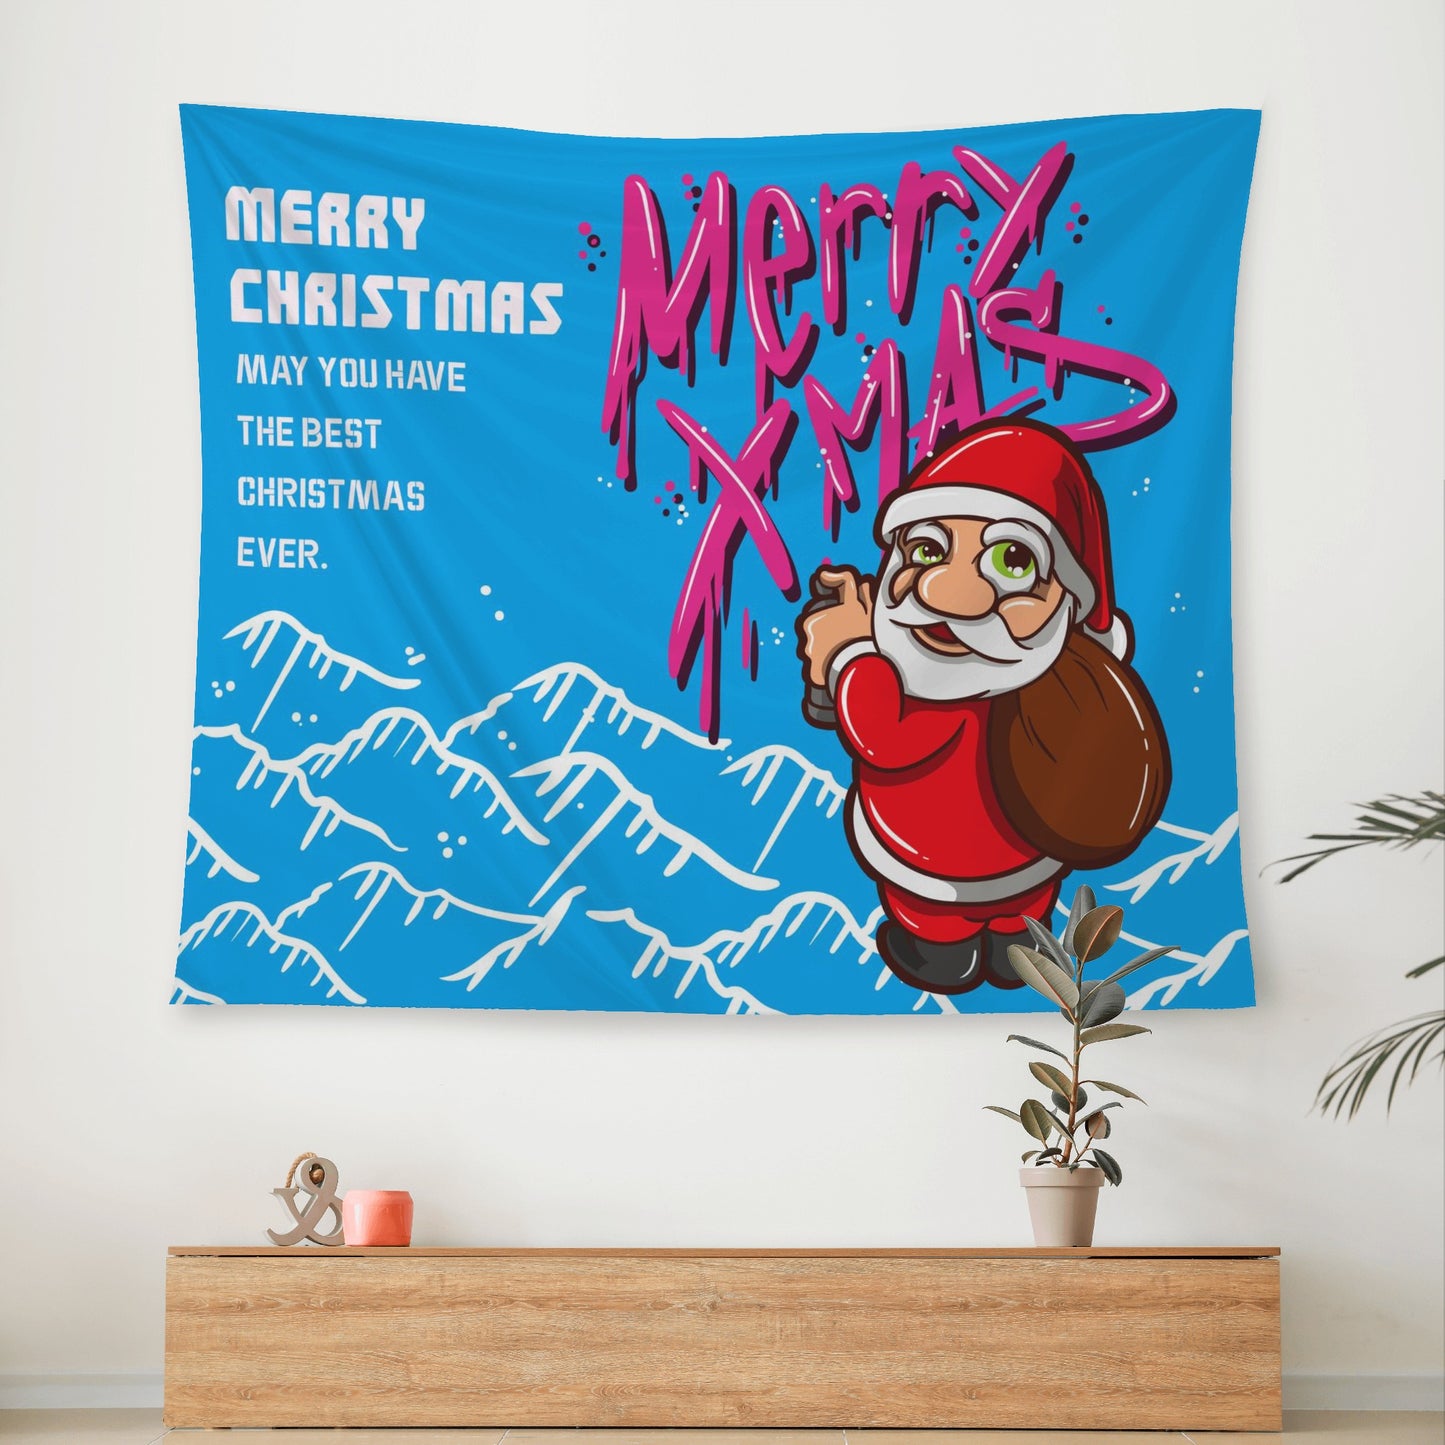 A Great Classroom Addition With a Christmas Wish Wall Tapestry